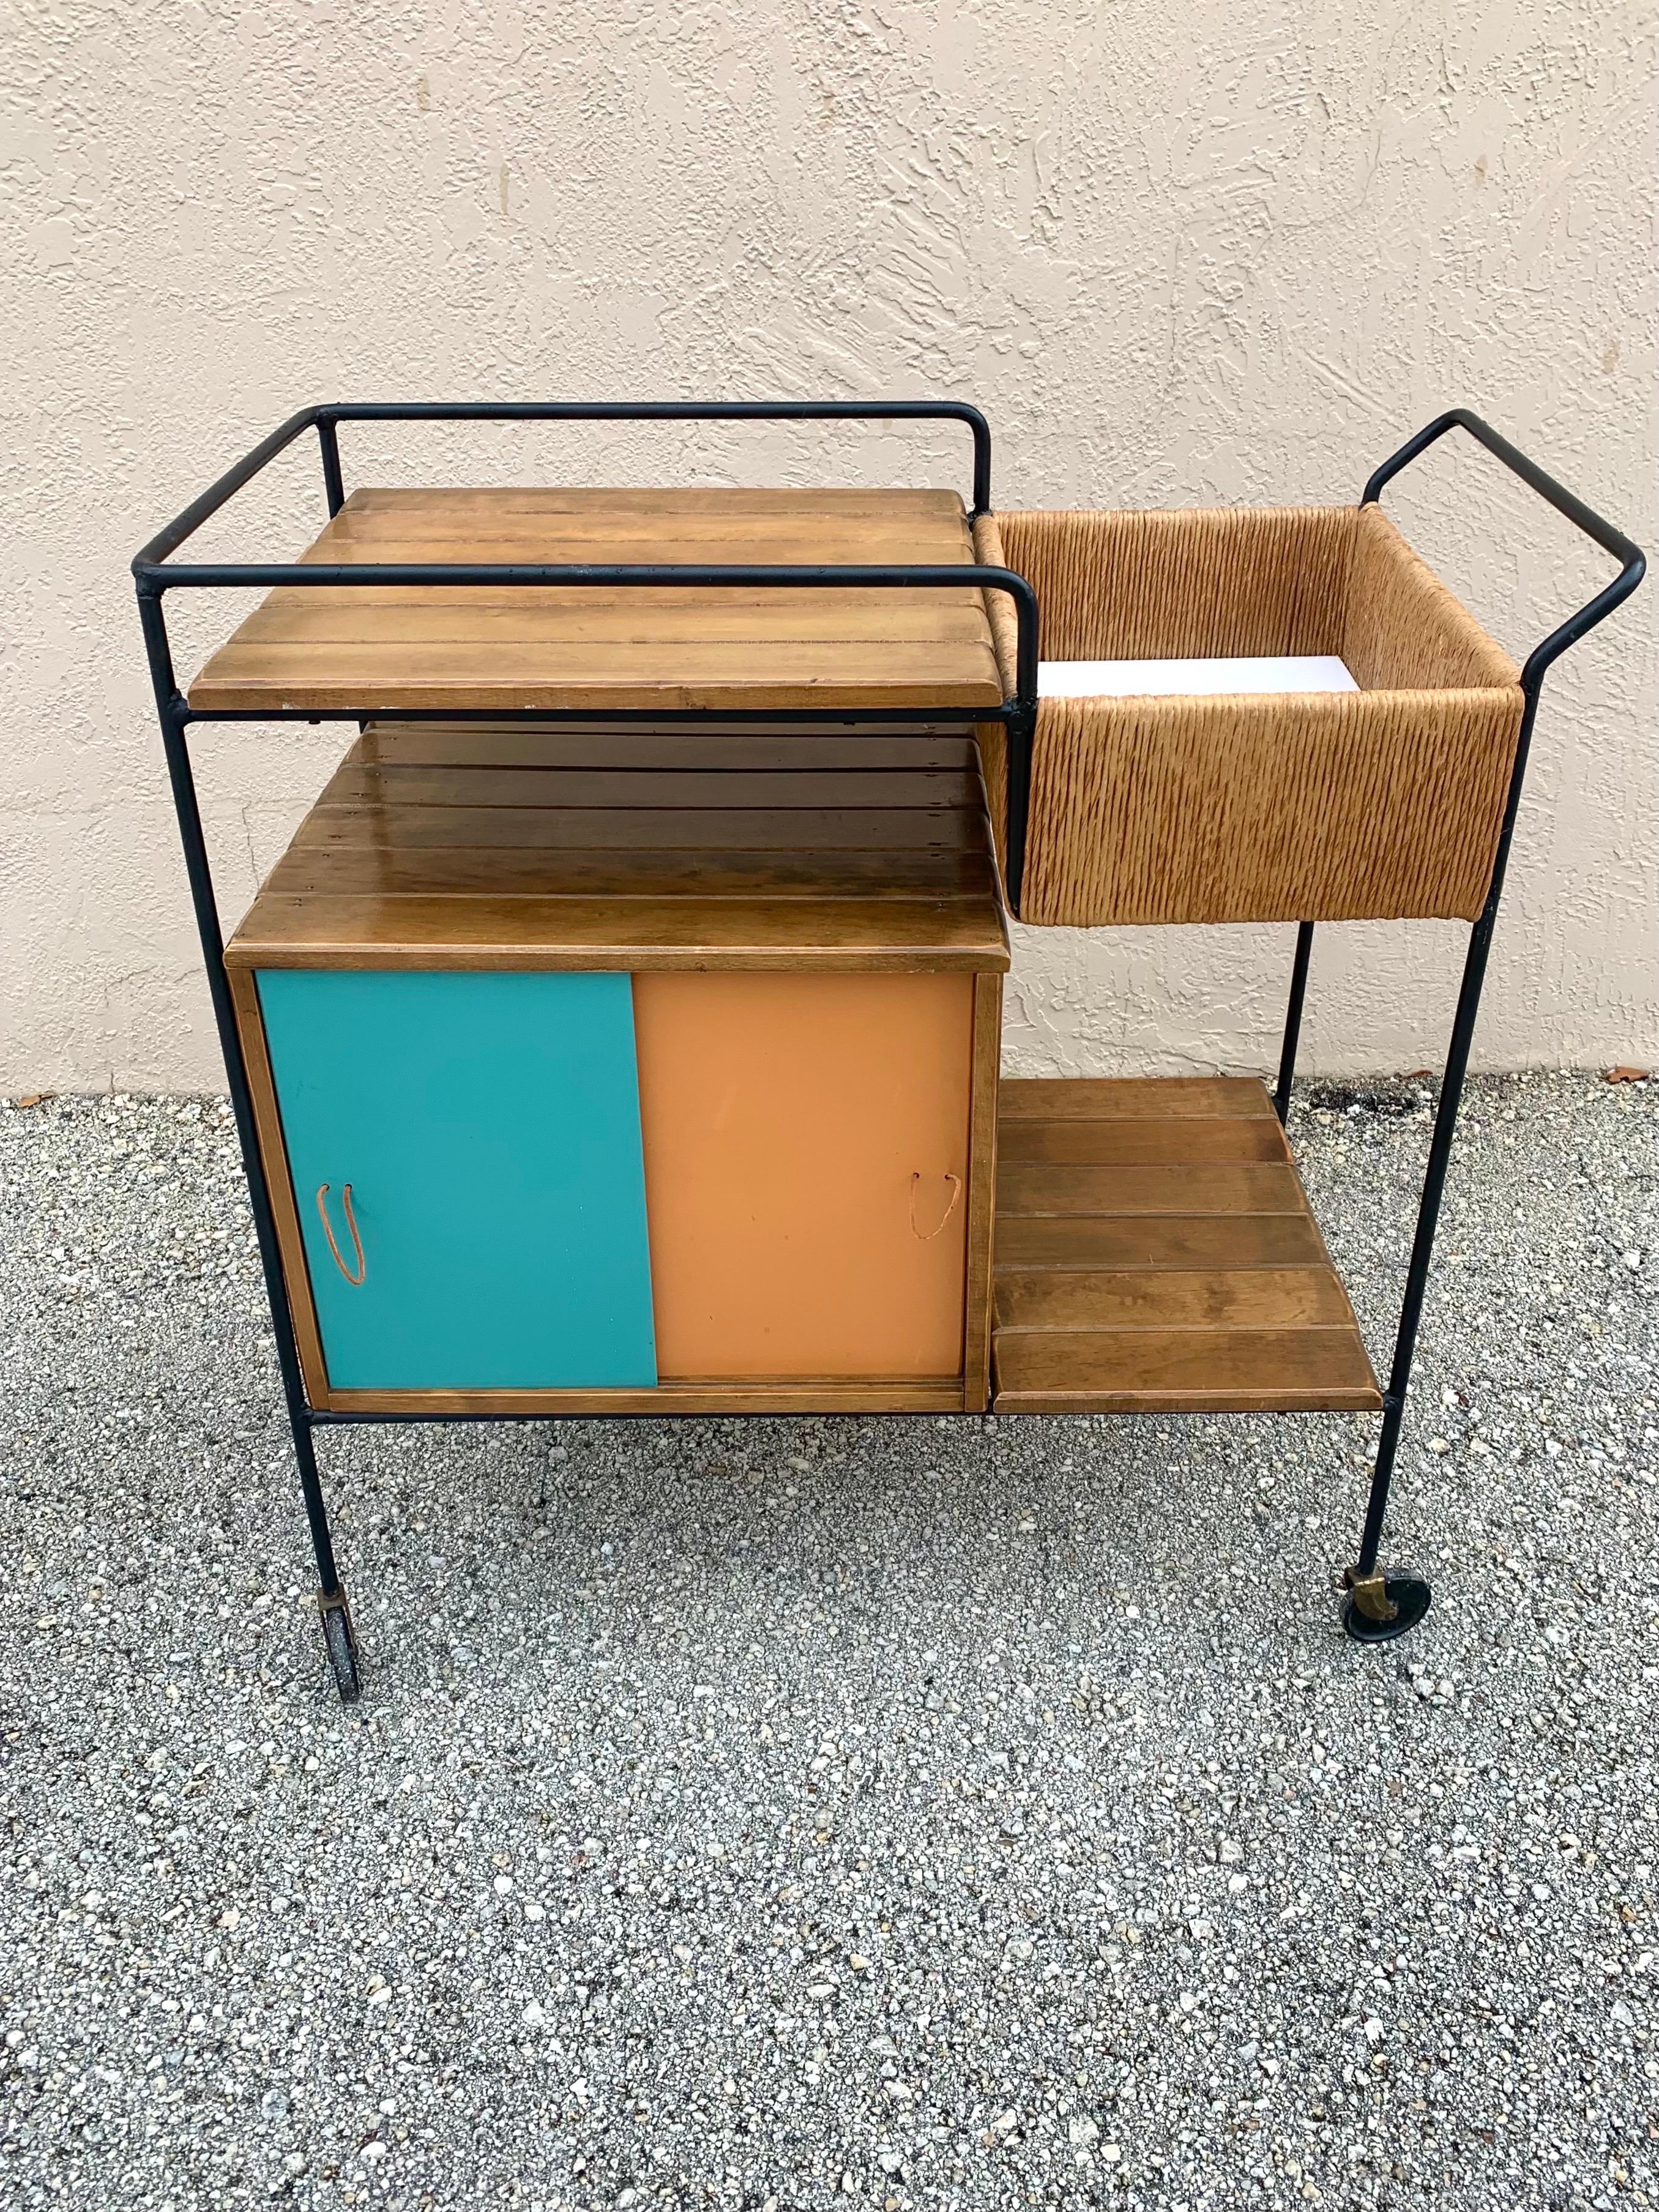 Mid-Century Modern Bar Cart designed by Arthur Umanoff. Aged iron frame with rush trim and slatted wood. Reversible Masonite sliding drawers appear on both sides. Both sides are able to be presented. The Masonite drawers are all white on one side.